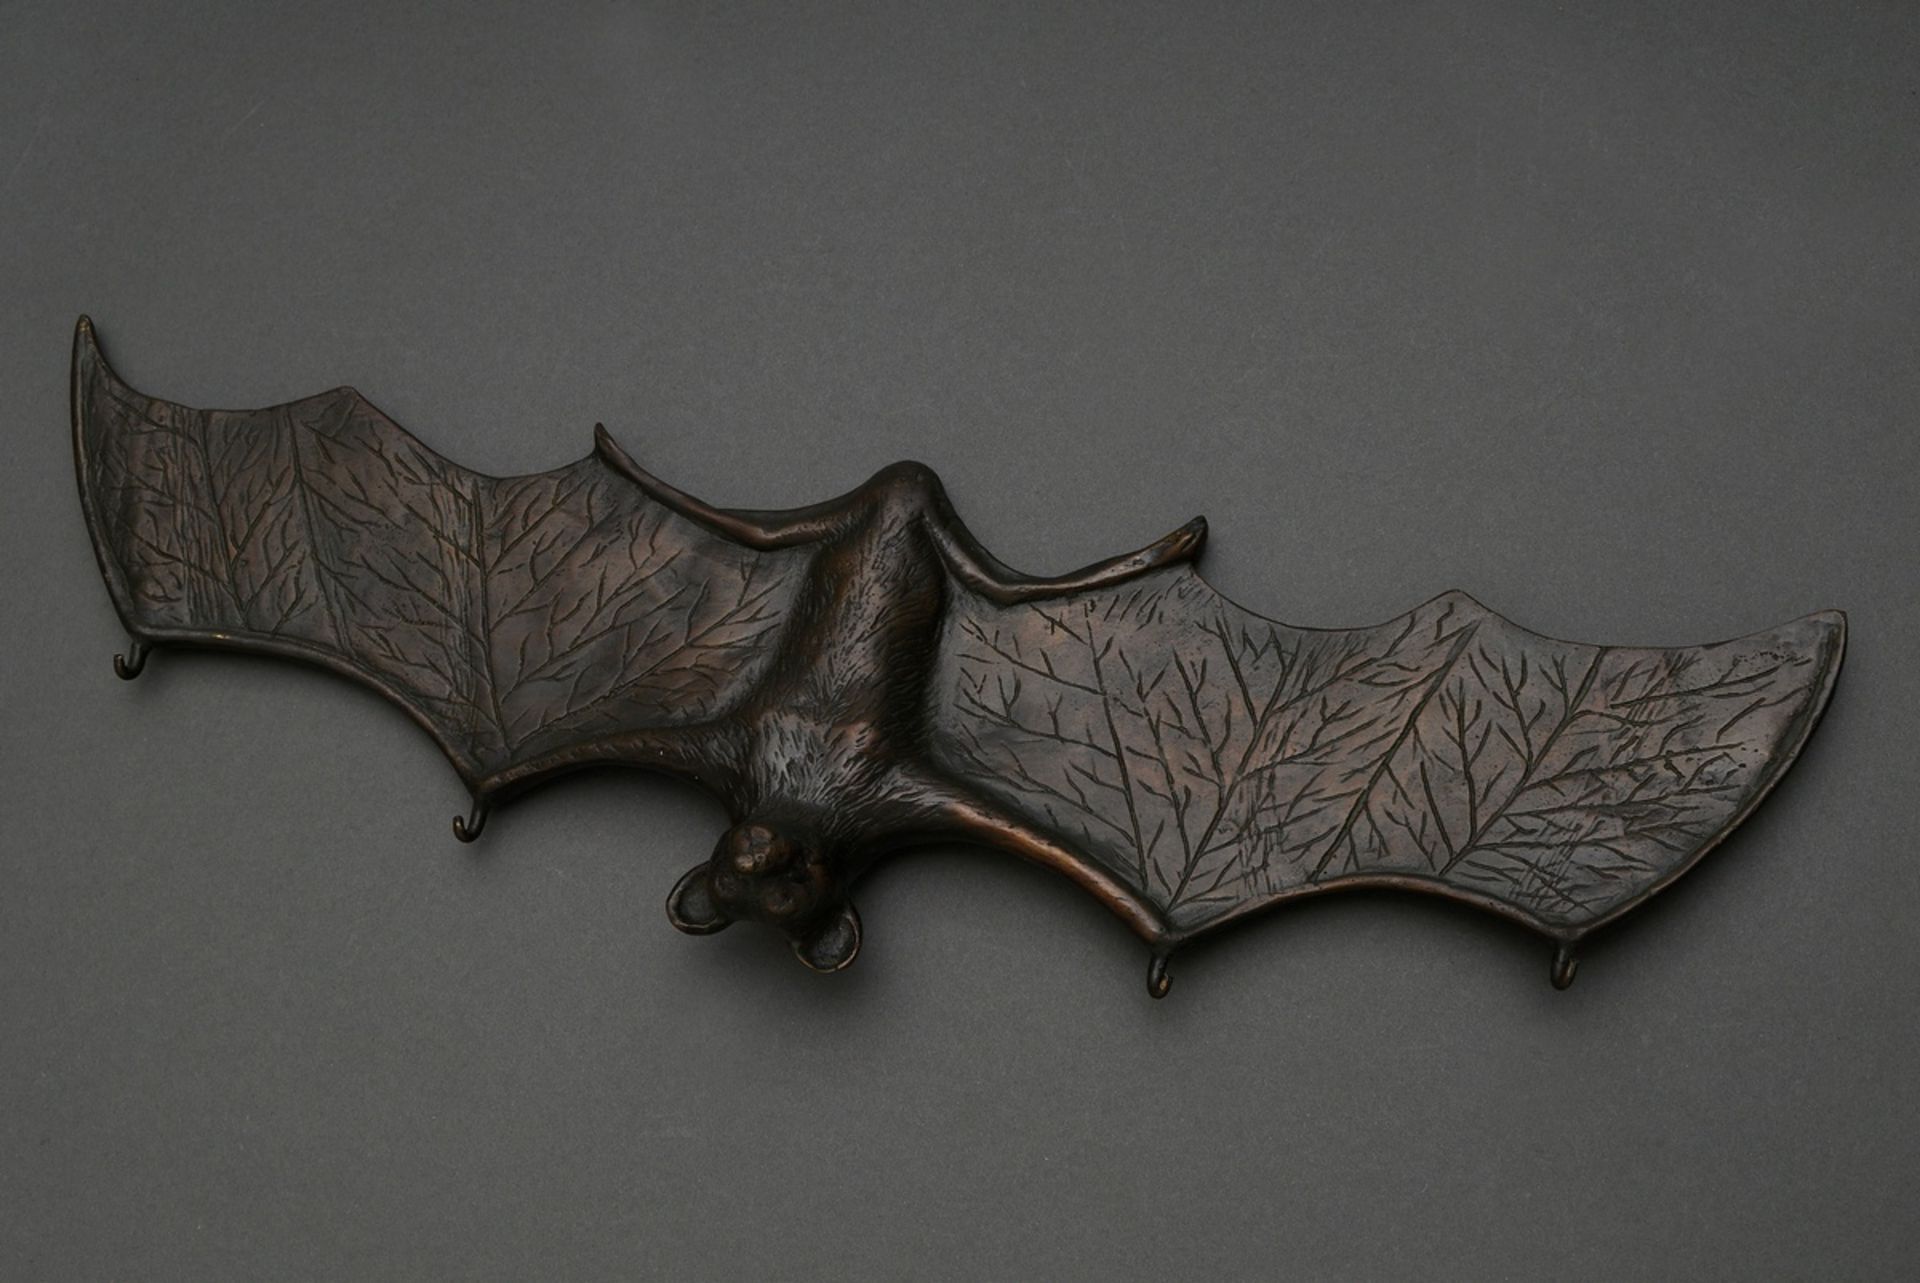 Large bronze "Bat" with outstretched wings and claw hook, c. 1900, w. 45.6cm - Image 3 of 4